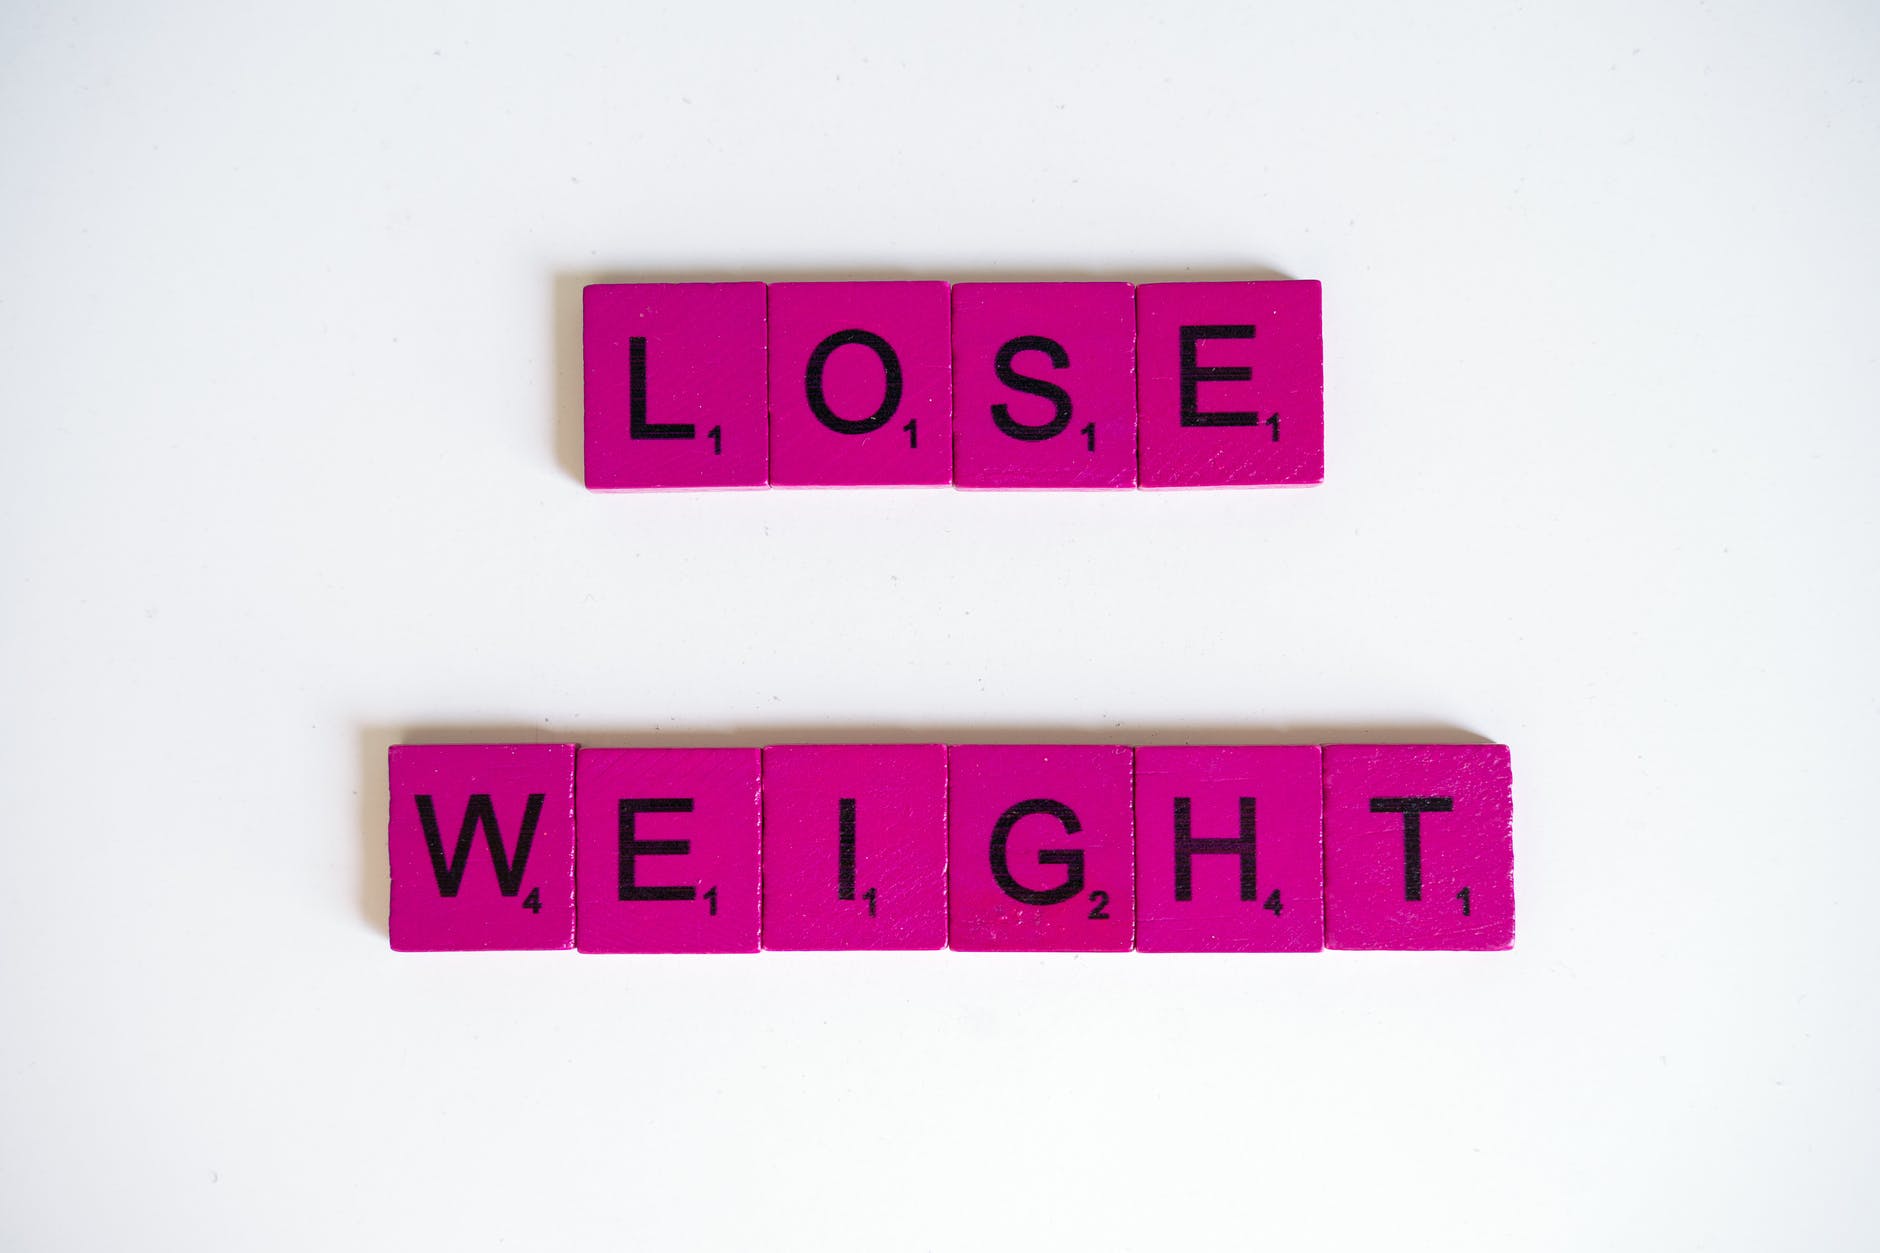 Lose-Weight